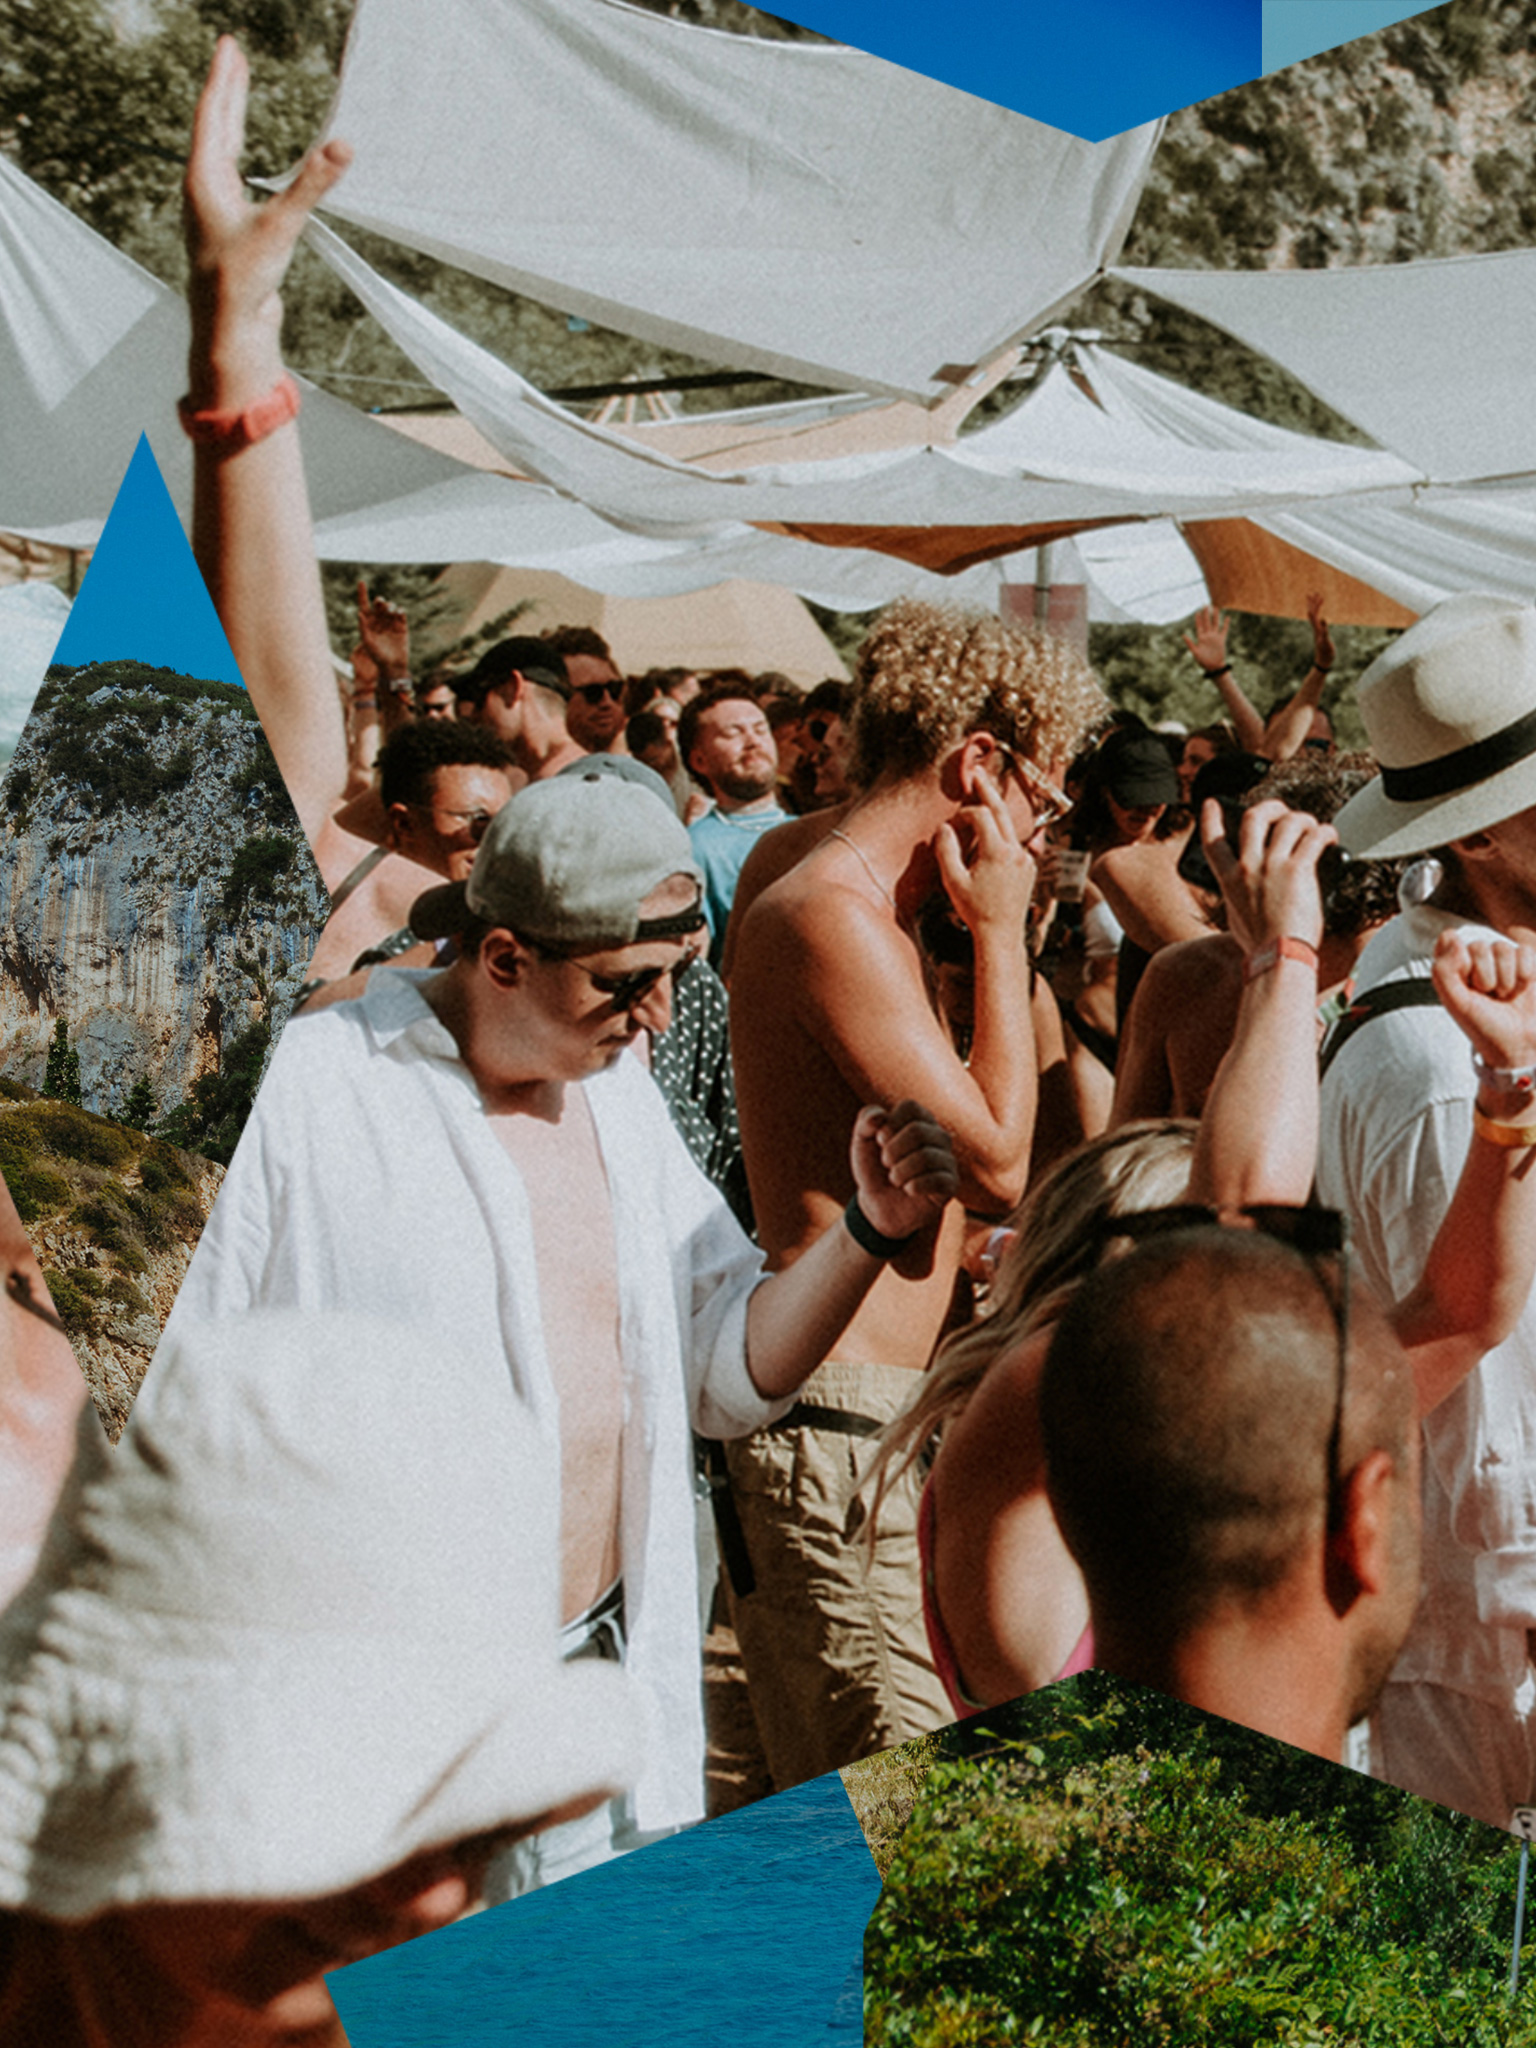 Can Destination Festivals Exist in Harmony With Local Communities?